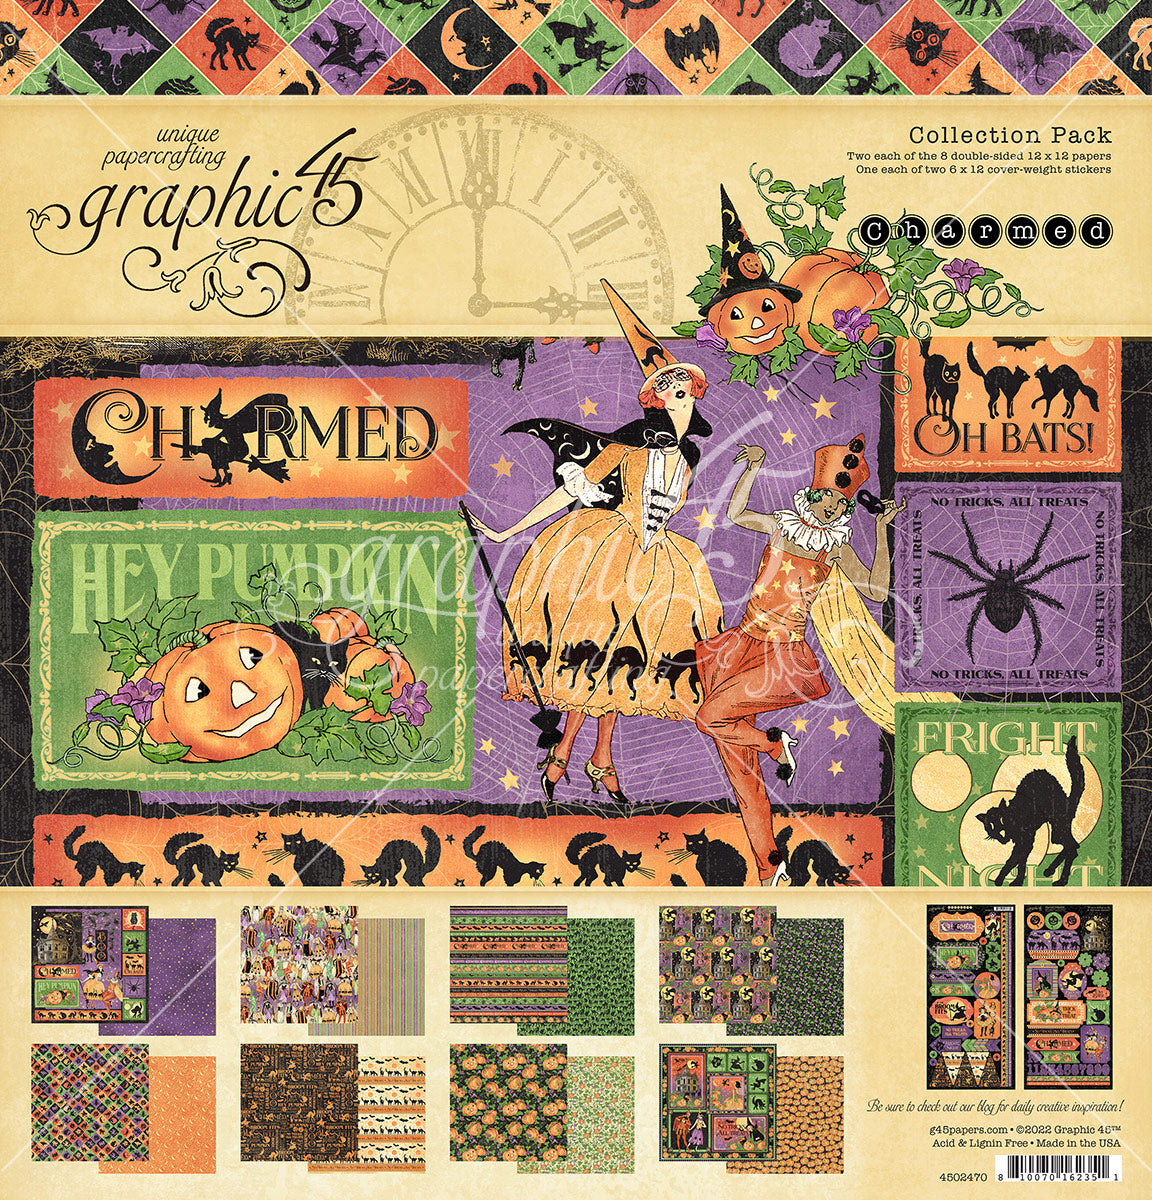 Charmed Collection 12 x 12 Scrapbook Collection Pack by Graphic 45